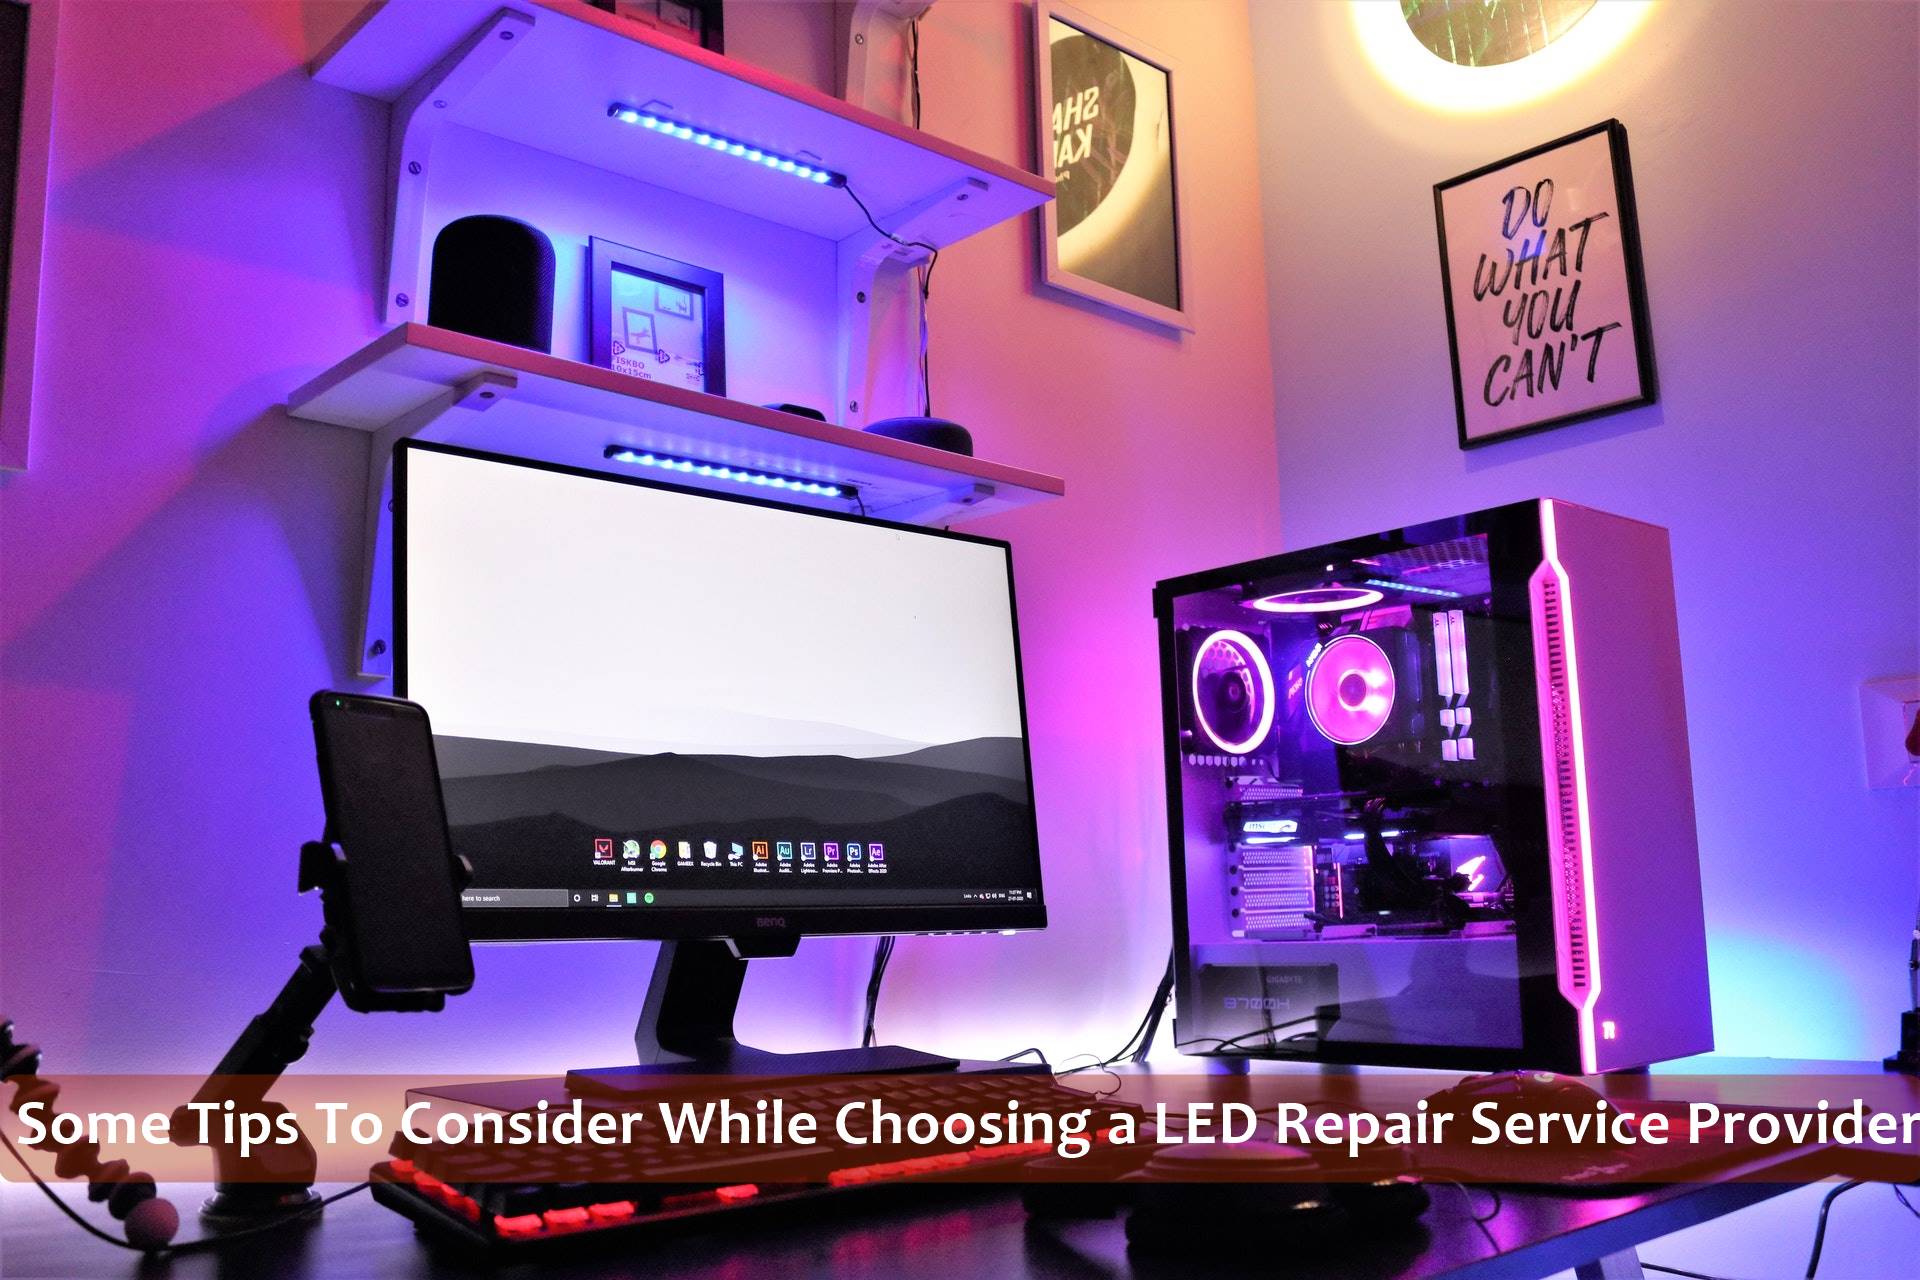 Planning to Repair Your LED Display? Here Are Some Tips To Consider While Choosing a LED Repair Service Provider